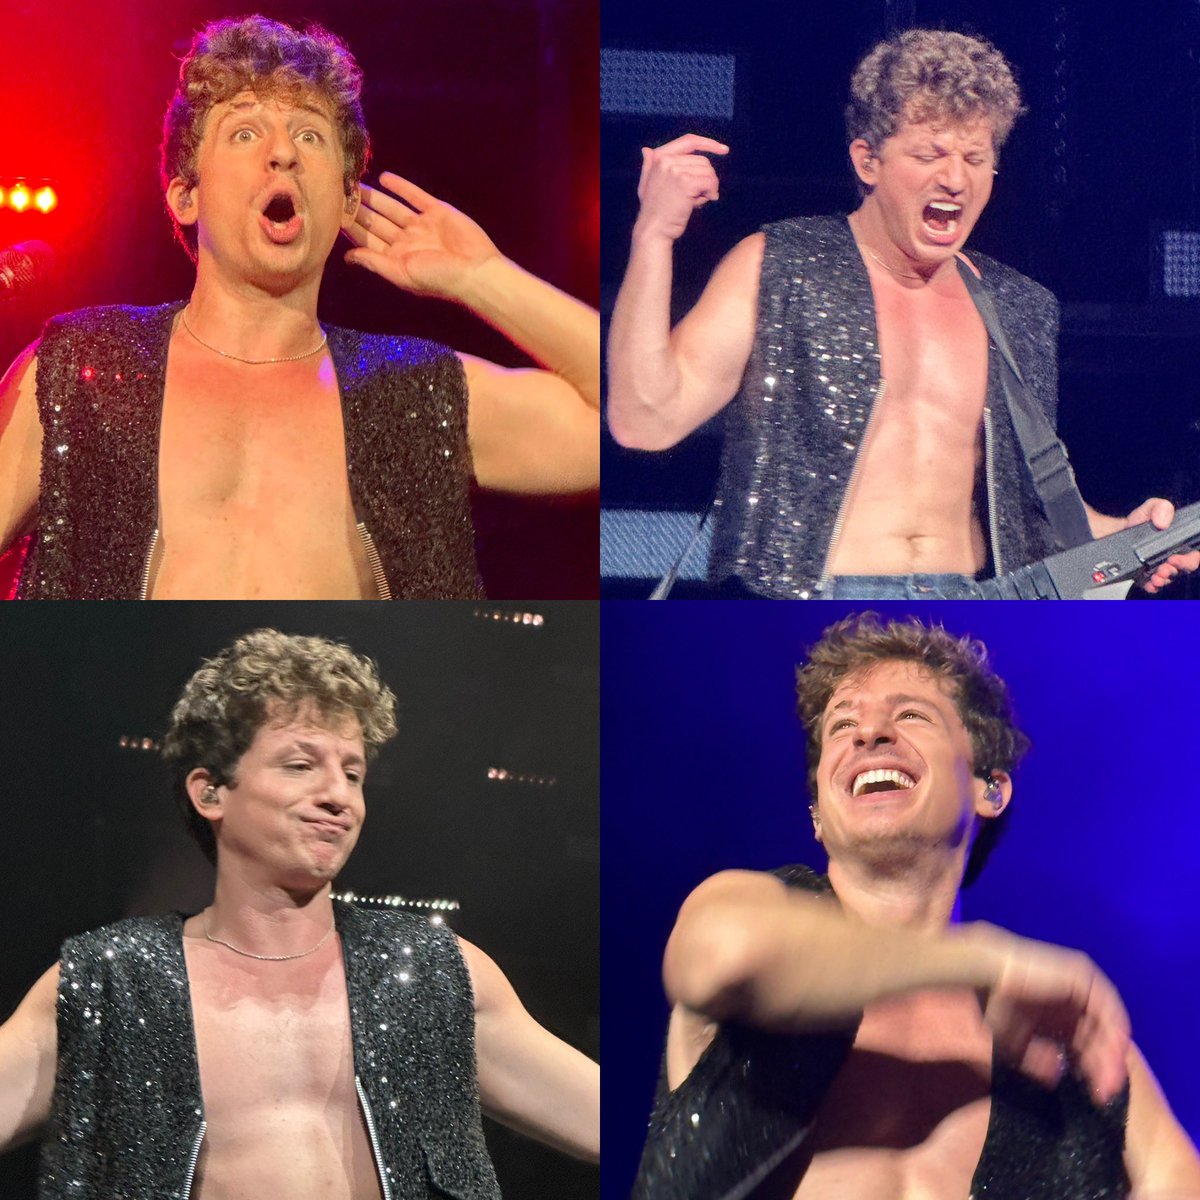 😮🤪😏😁 the many faces of @charlieputh haha 
#TheCharlieLiveExperience